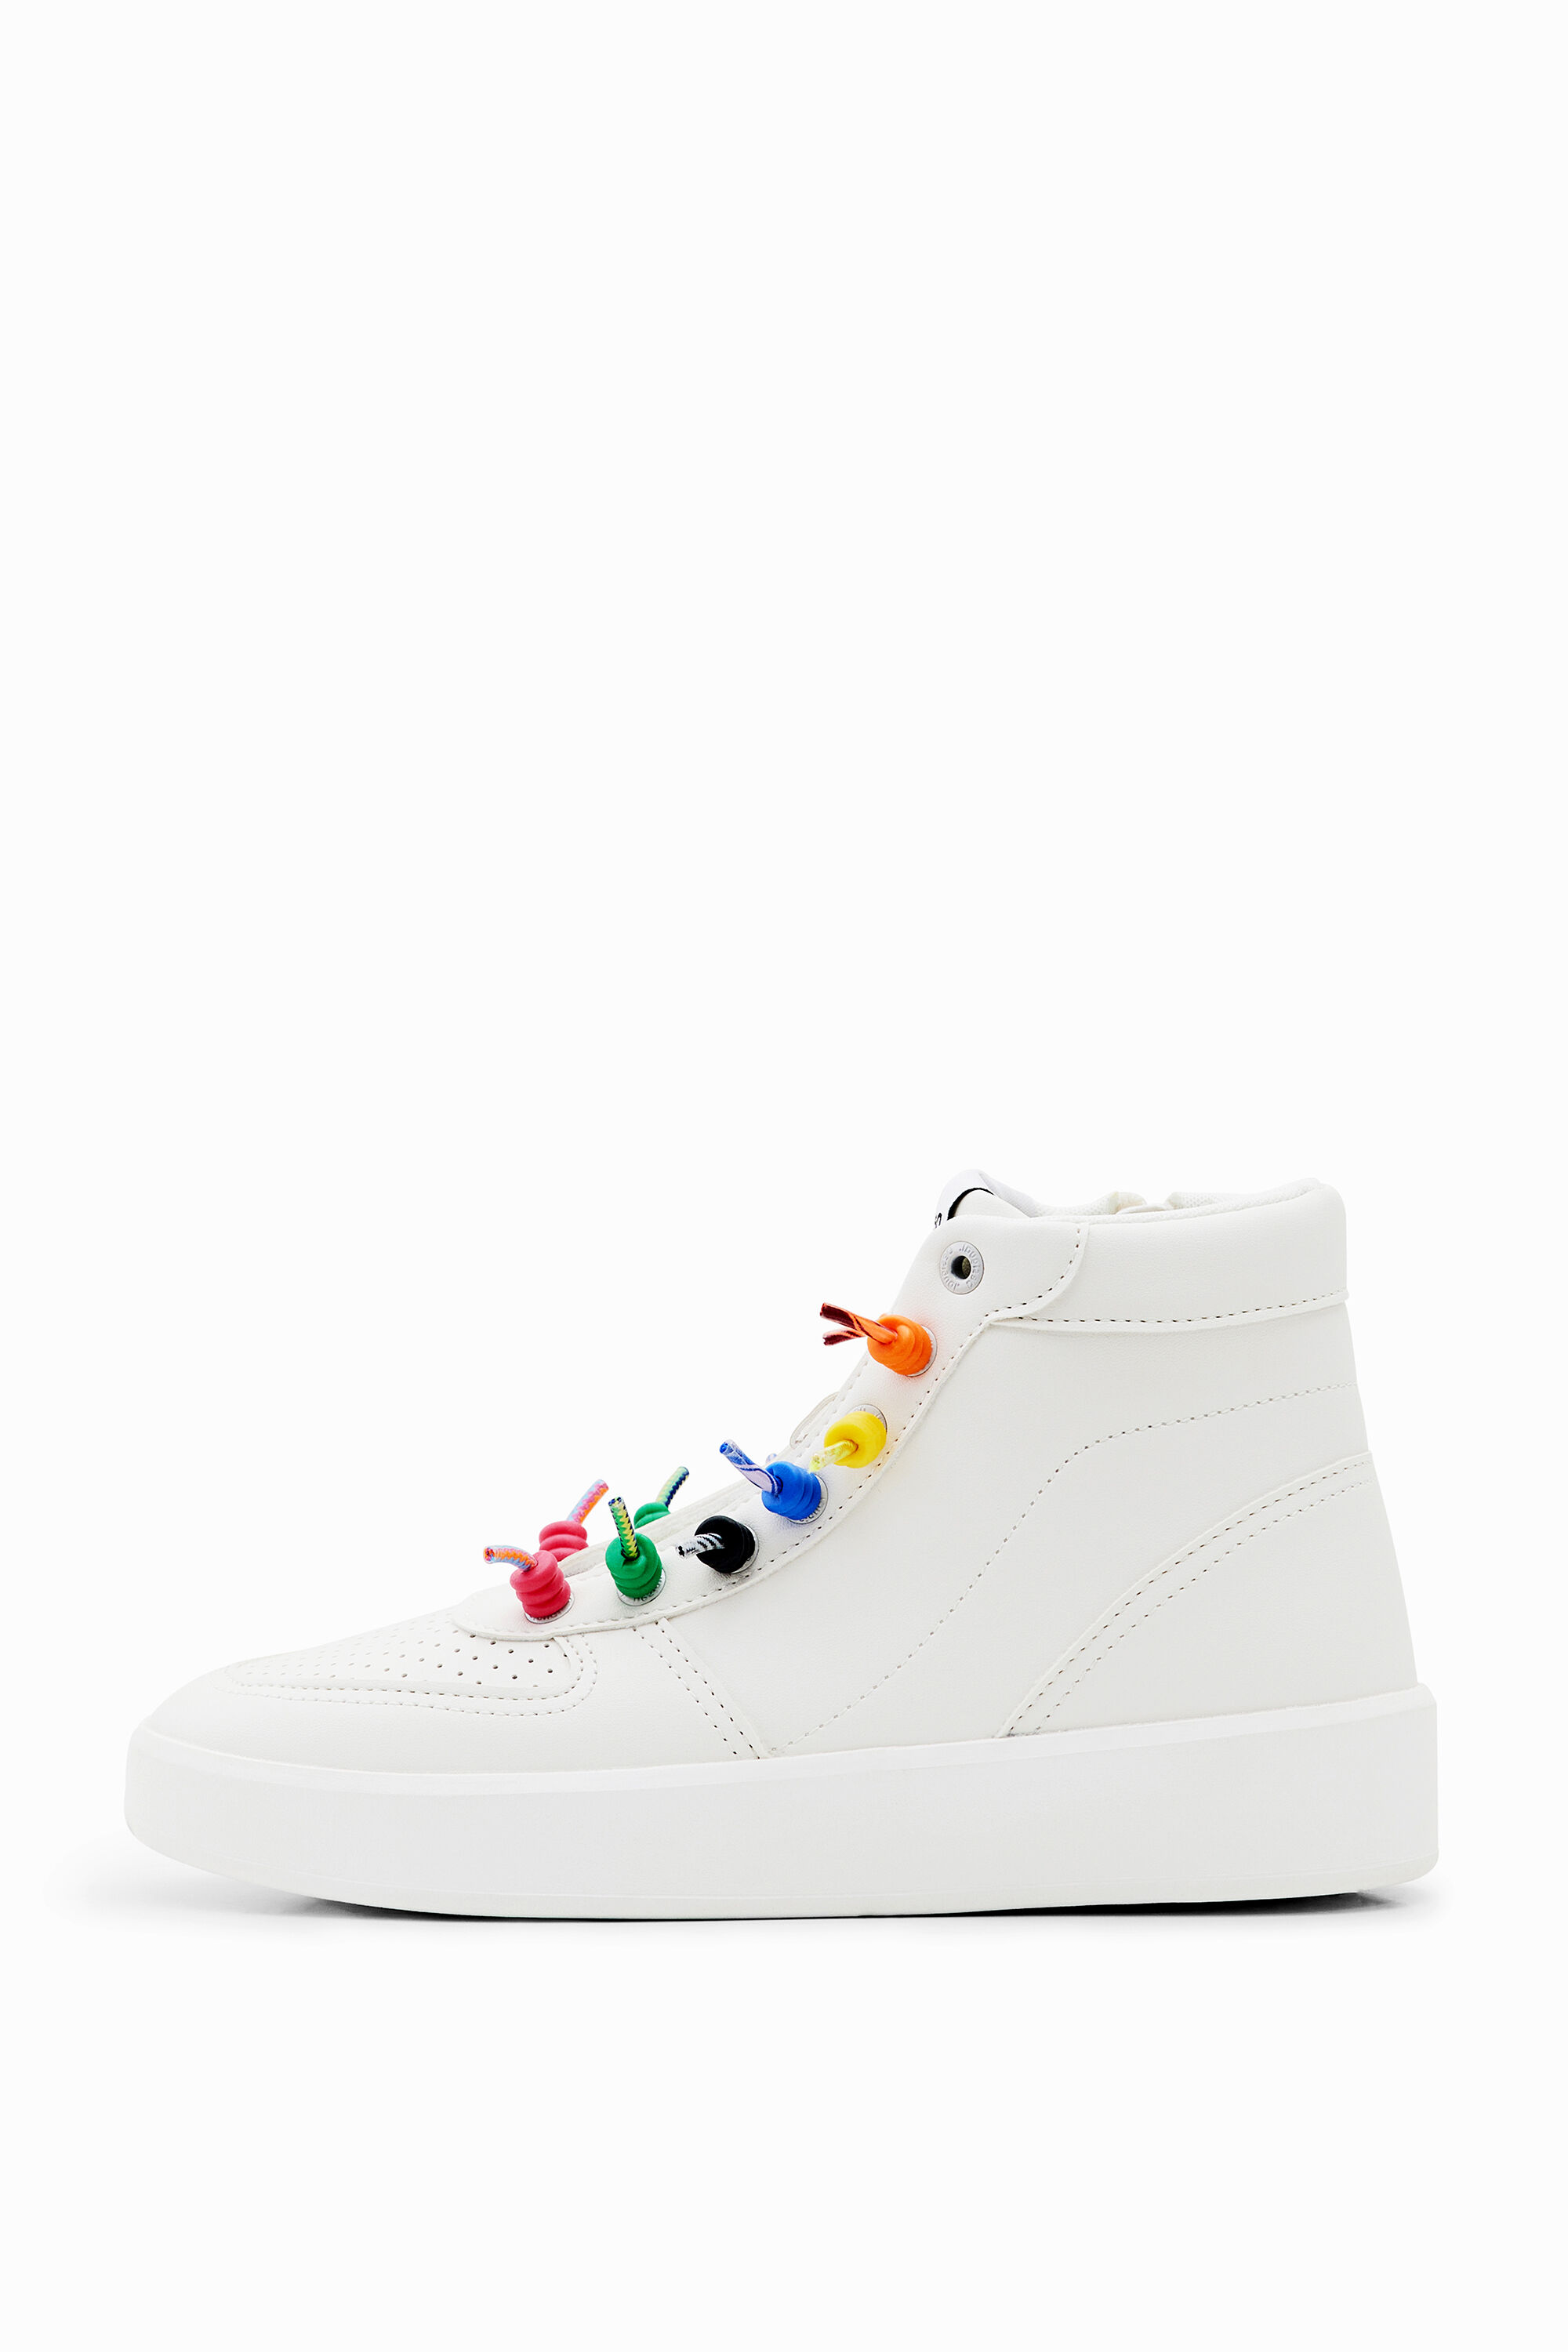 Rainbow lace high-top sneakers - WHITE - 40